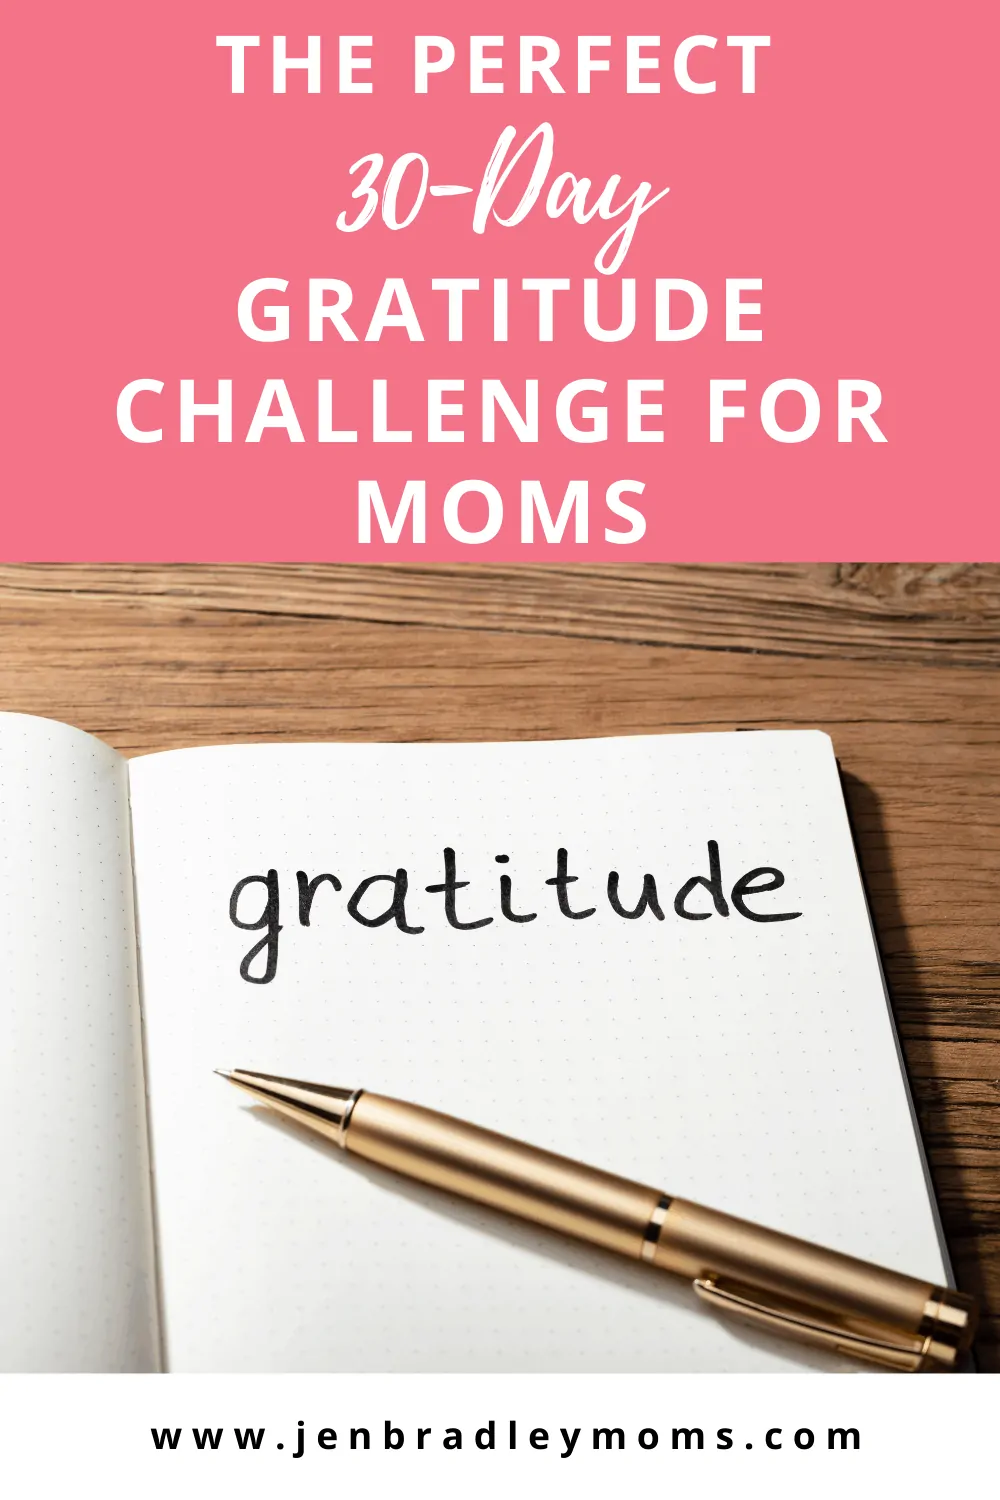 Try the Perfect 30-Day Gratitude Challenge for Moms